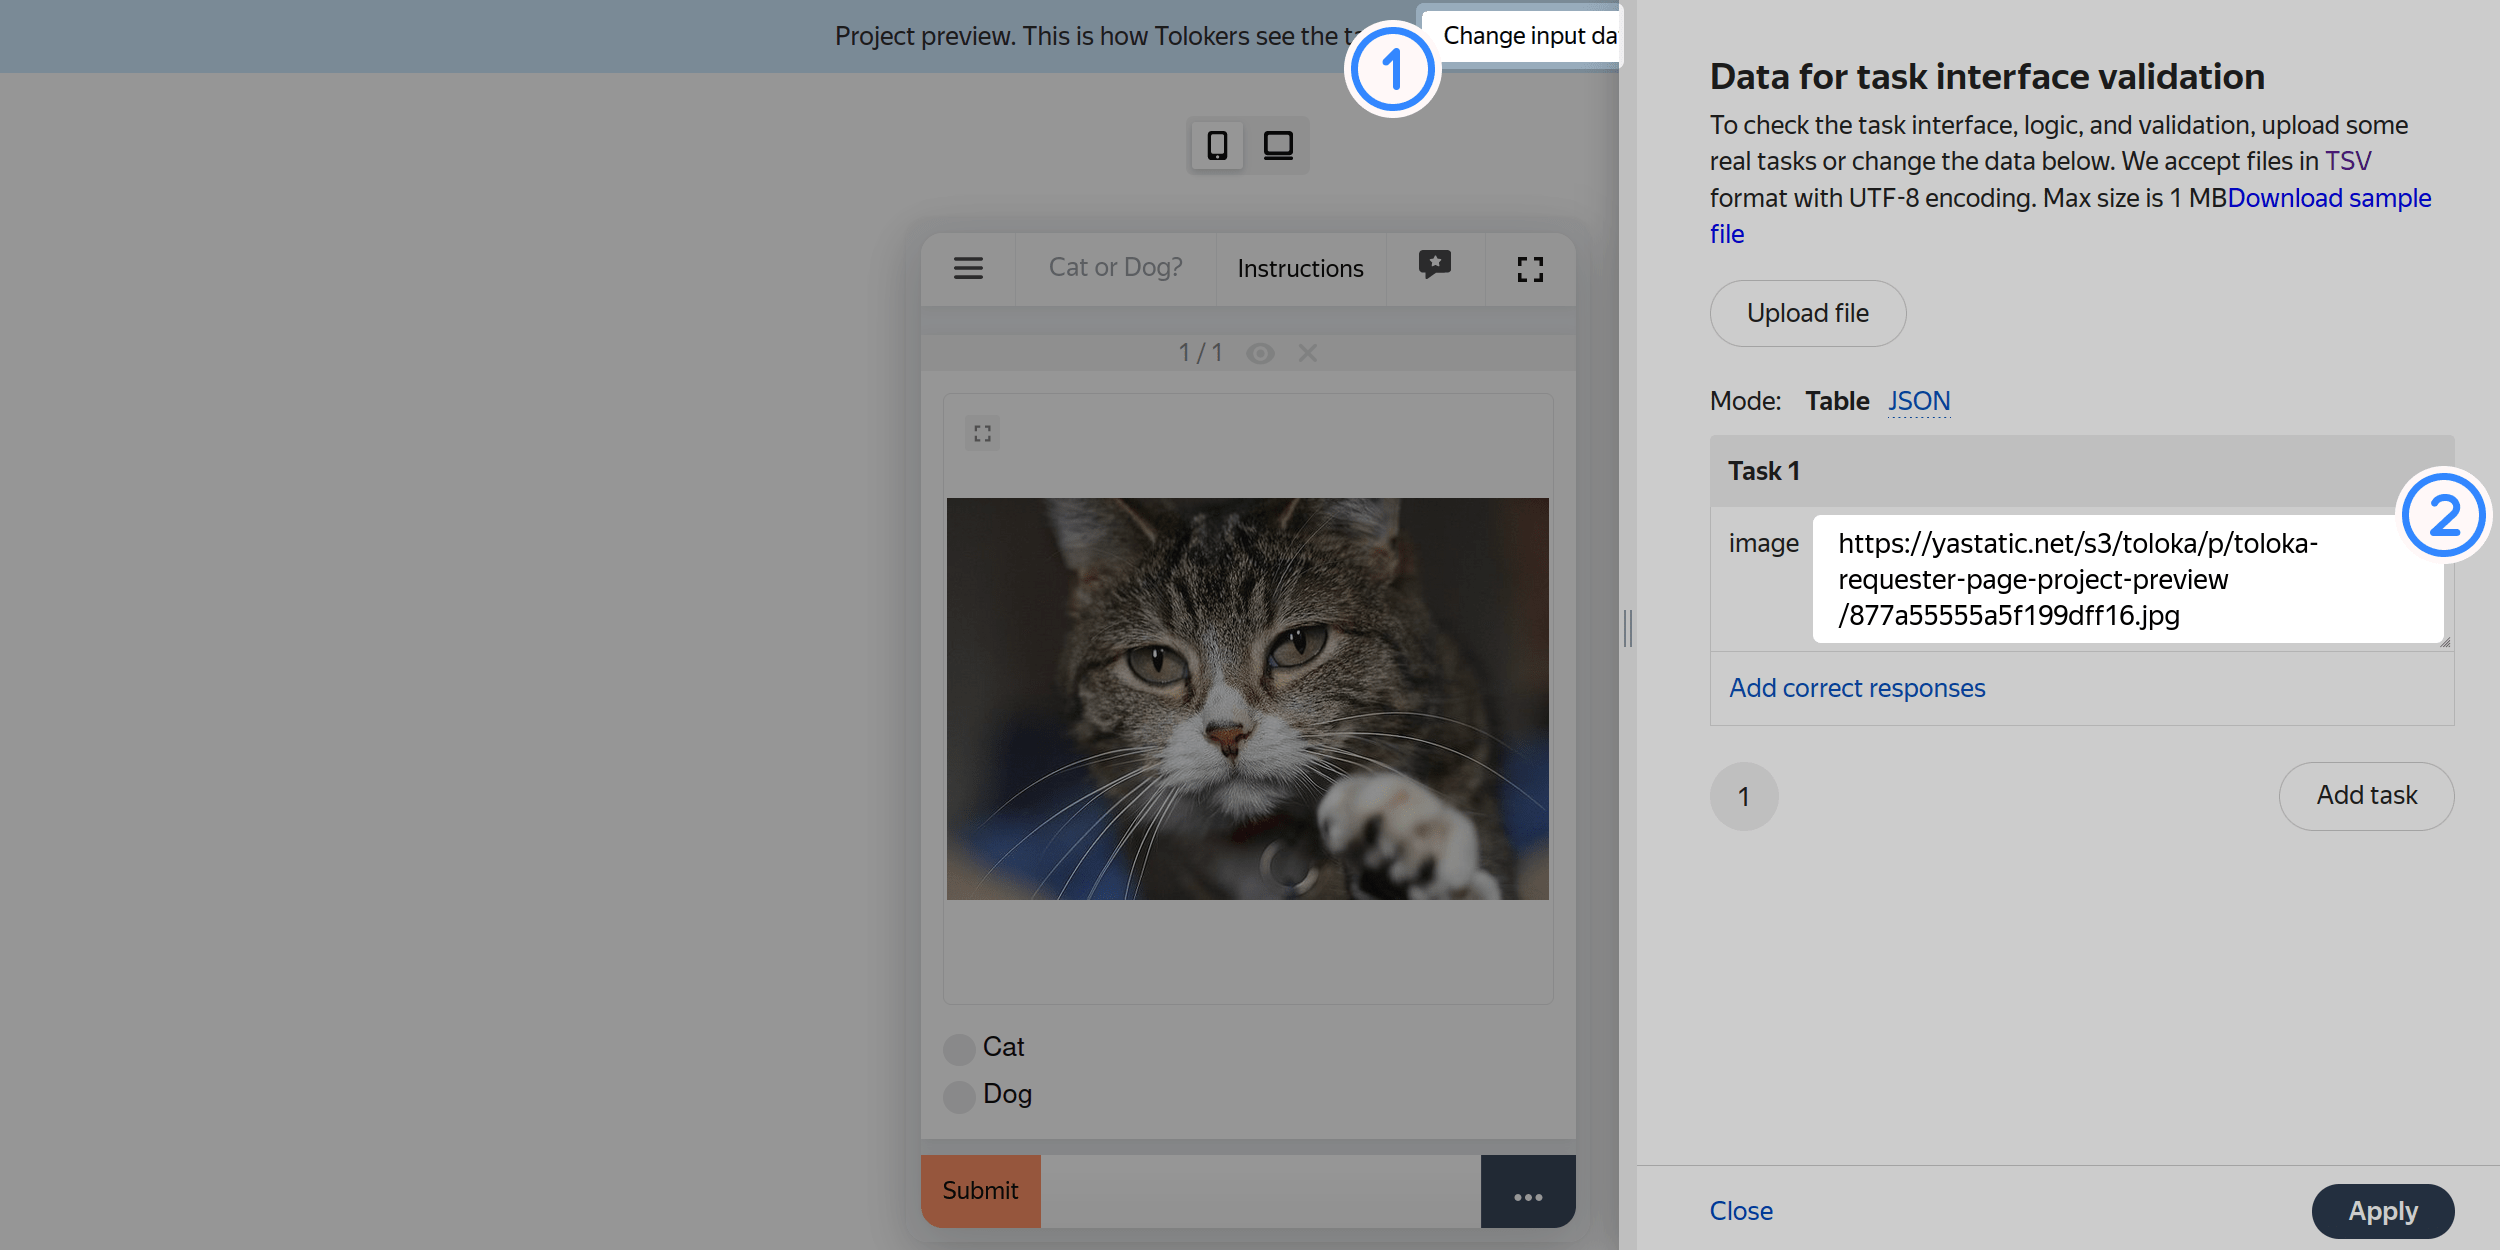 What the task interface might look like and how to insert images in the preview